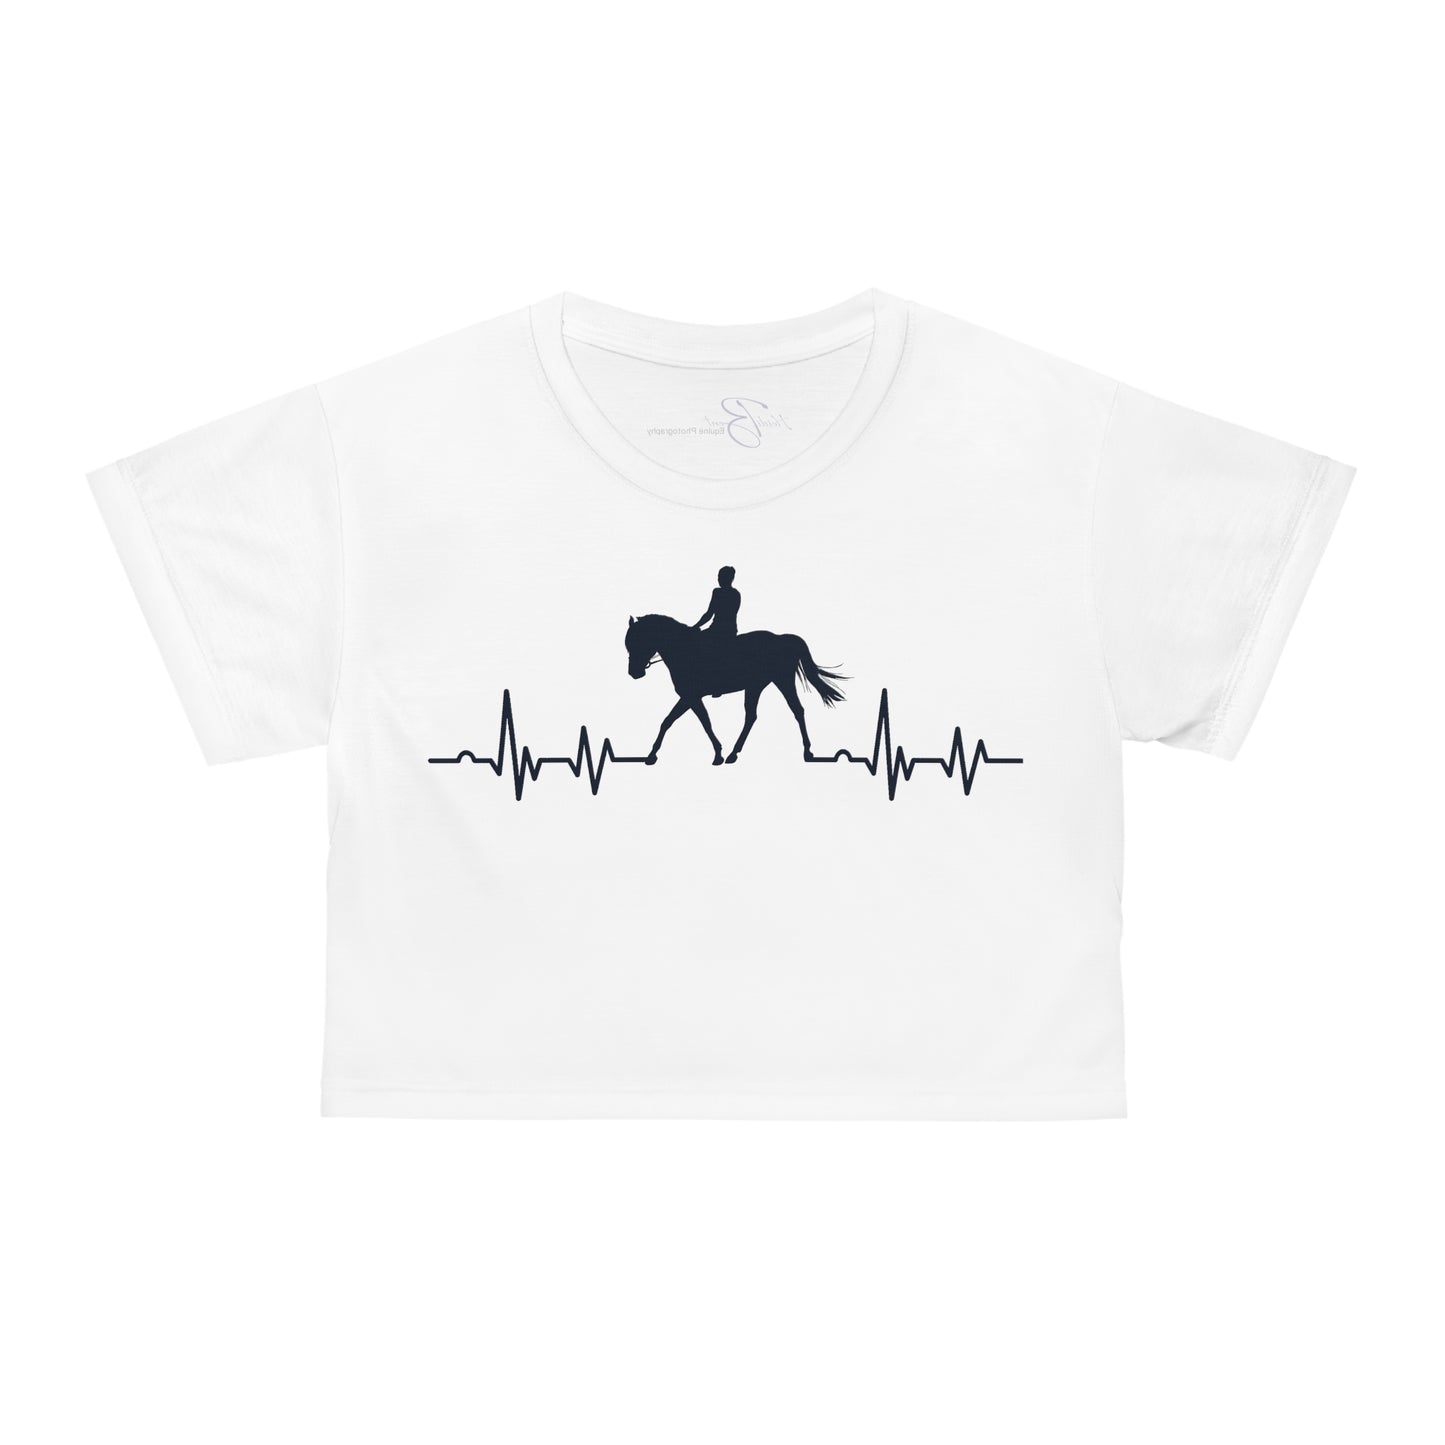 We Ride to Live - Crop T-Shirt